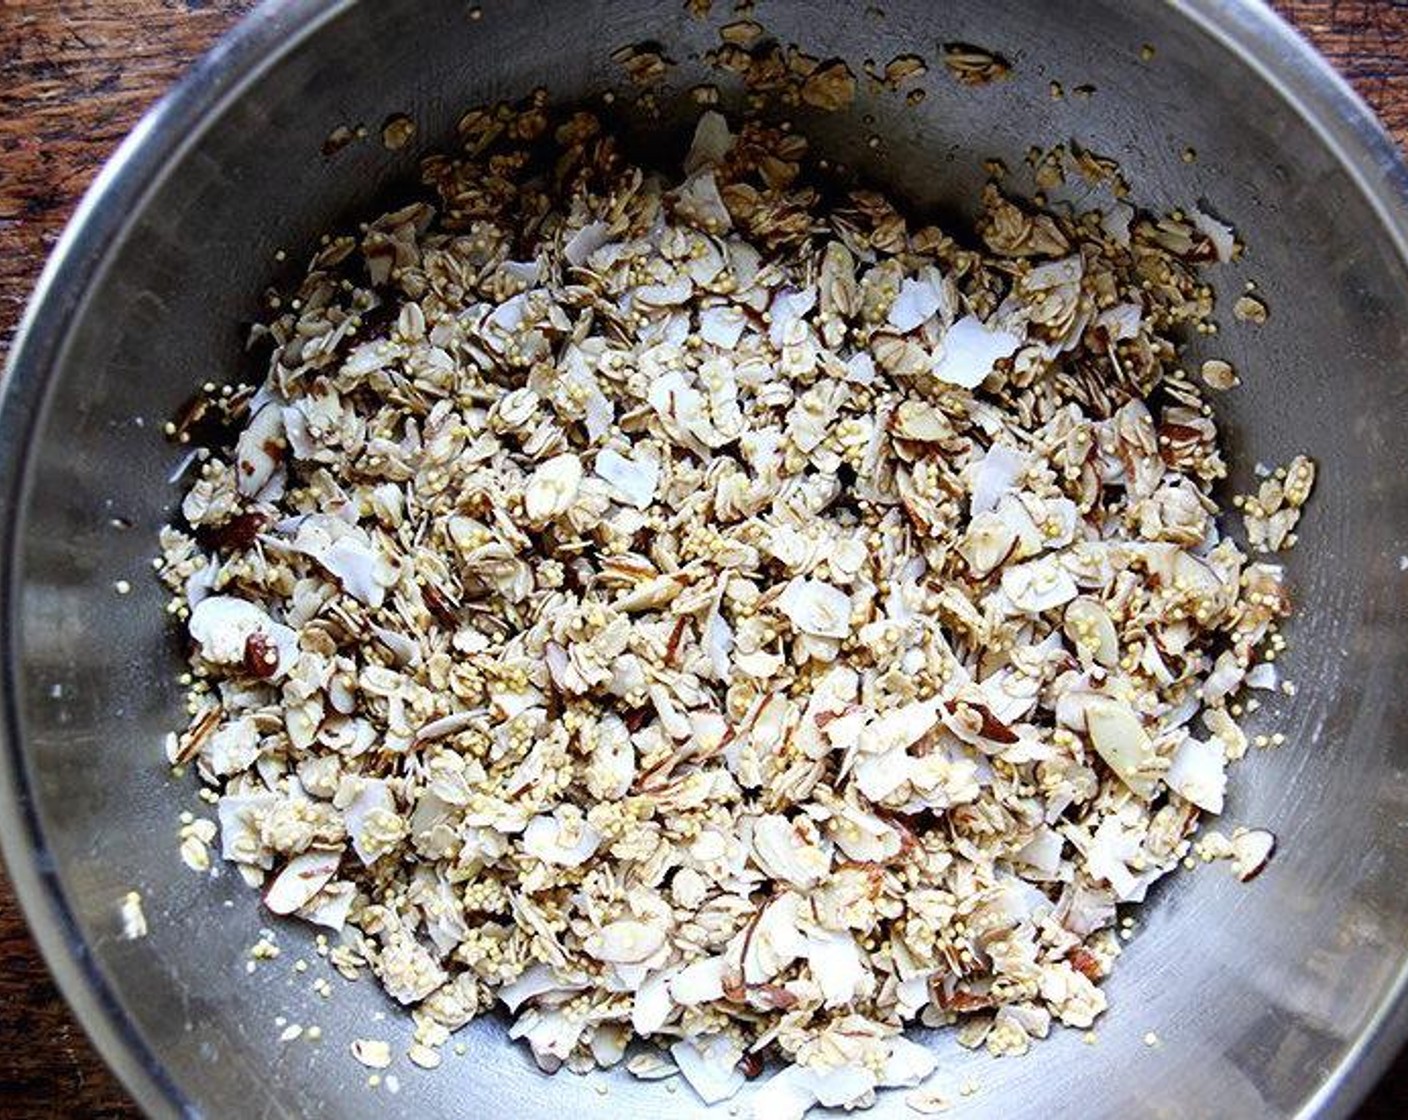 step 2 In a large bowl, toss together the Whole Millet (1/2 cup), Old Fashioned Rolled Oats (2 cups), Unsweetened Coconut Flakes (3/4 cup), Sliced Almonds (1 1/4 cups) and Sea Salt (1 tsp). Pour in the Maple Syrup (1/2 cup) and Coconut Oil (3 Tbsp). Stir to coat.